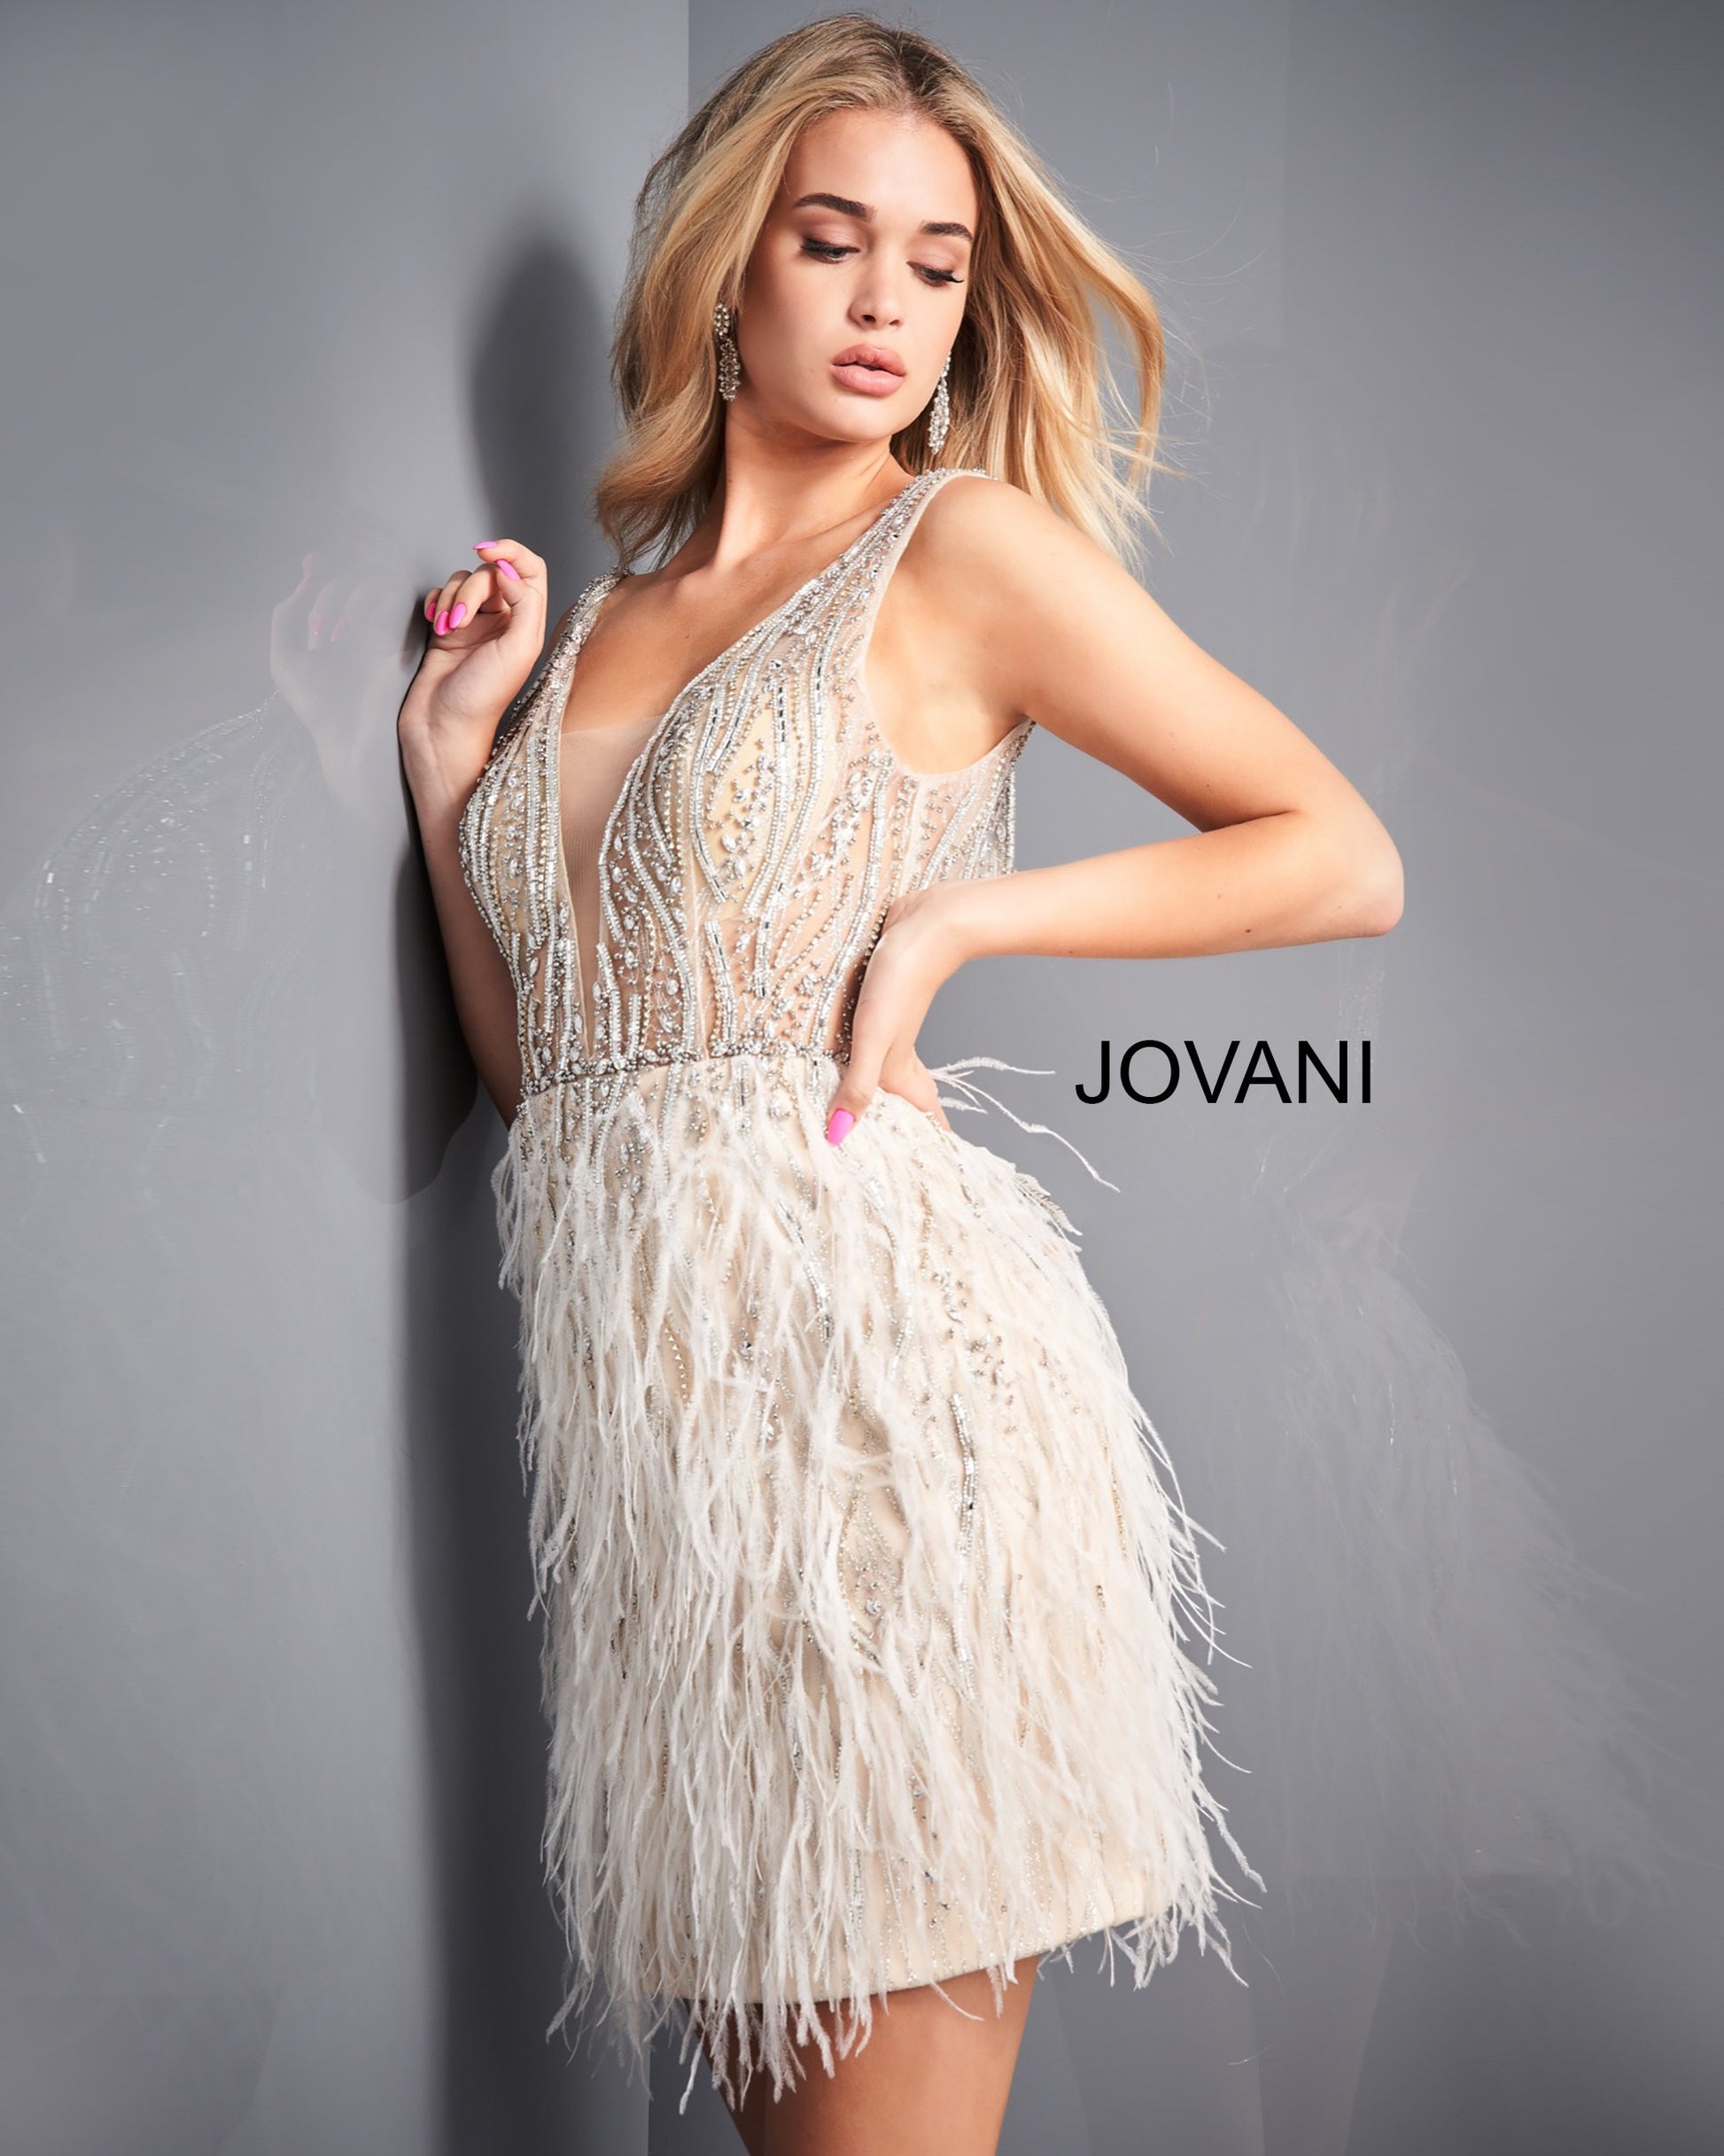 Jovani 04619 is a short feather embellished formal cocktail dress. Sheer Beaded & Embellished Fitted Bodice with a deep V Plunging neckline and sheer mesh insert. open v back. Embellishments cascade down into the sheath short skirt surrounded by lush feather accents. This dress is perfect for Prom, Pageant, Red Carpet, Homecoming & So many more formal events.